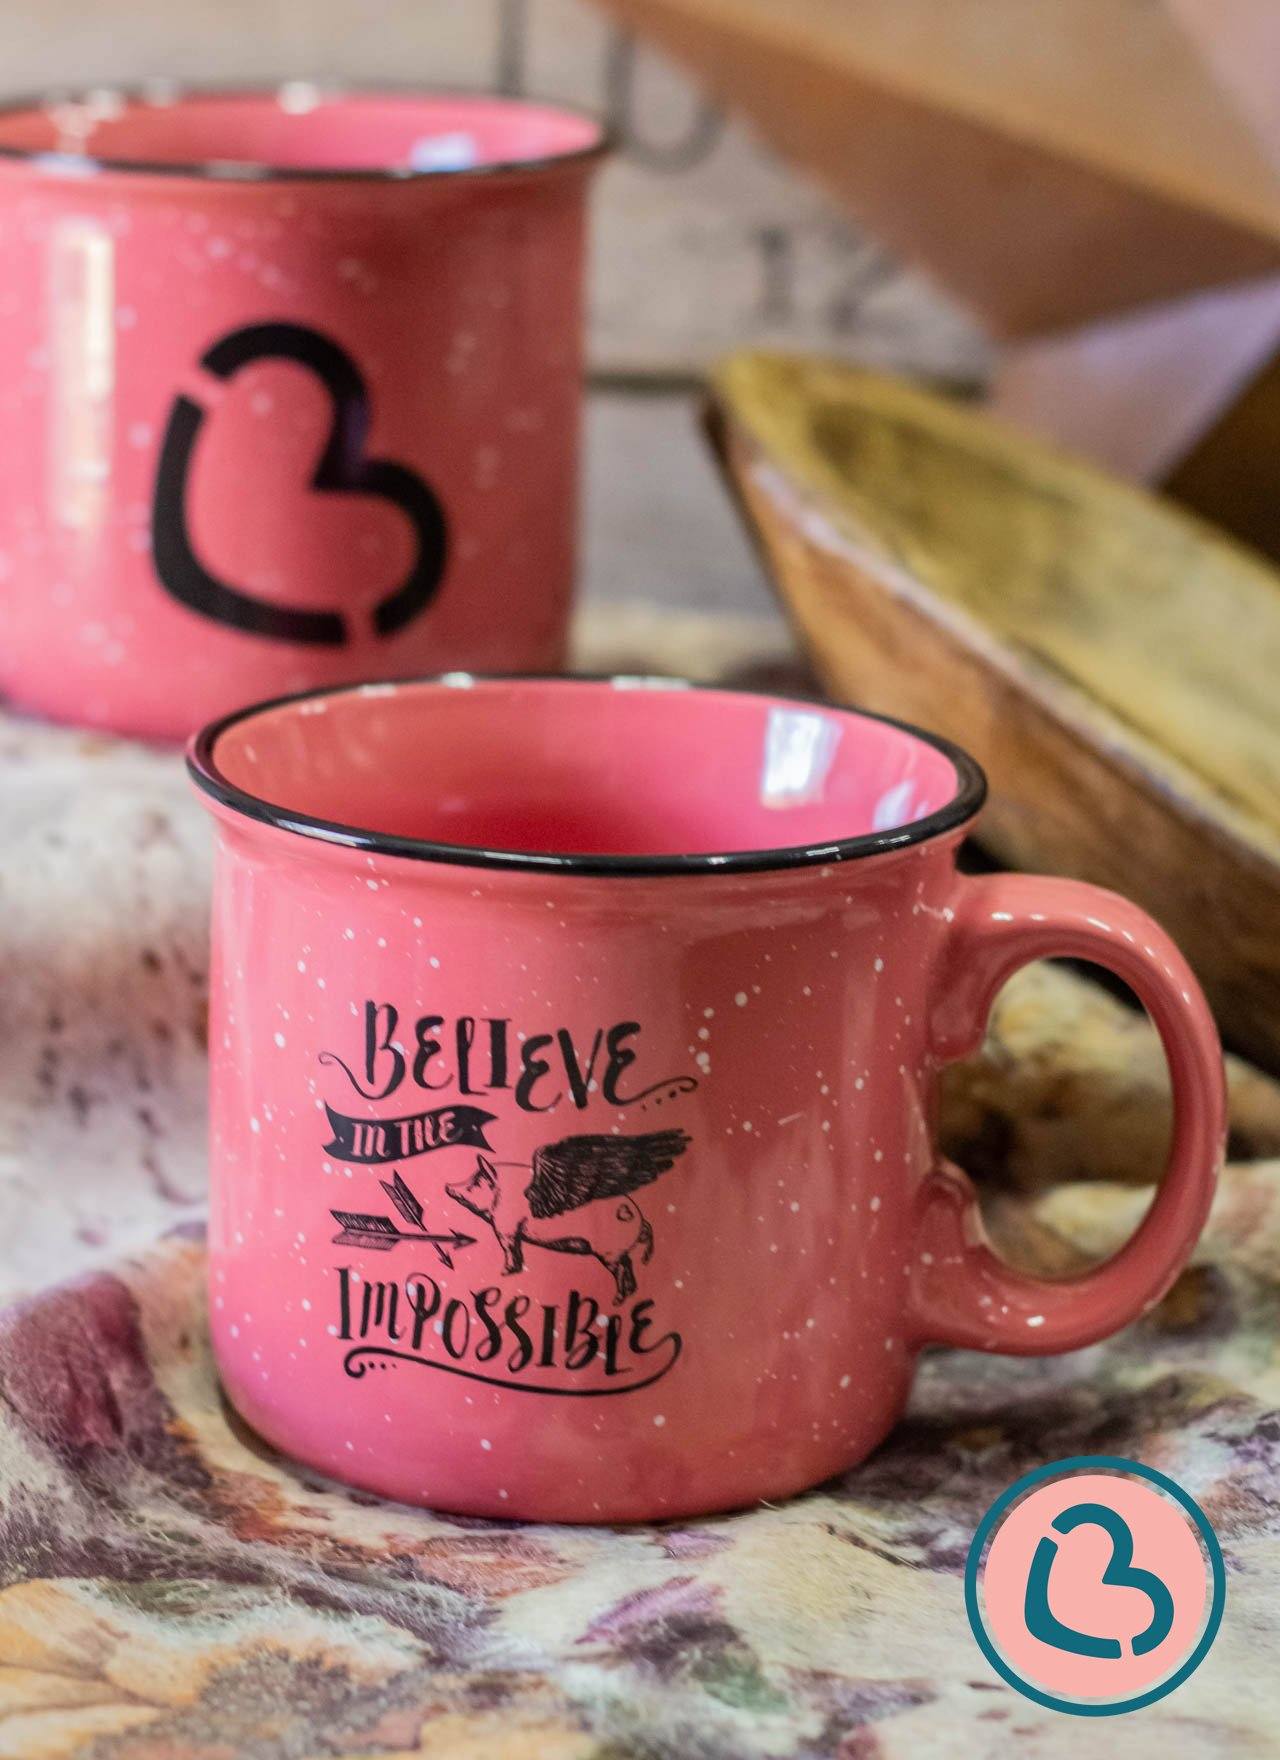 Believe in the Impossible Mug on Coral Accessories 74 